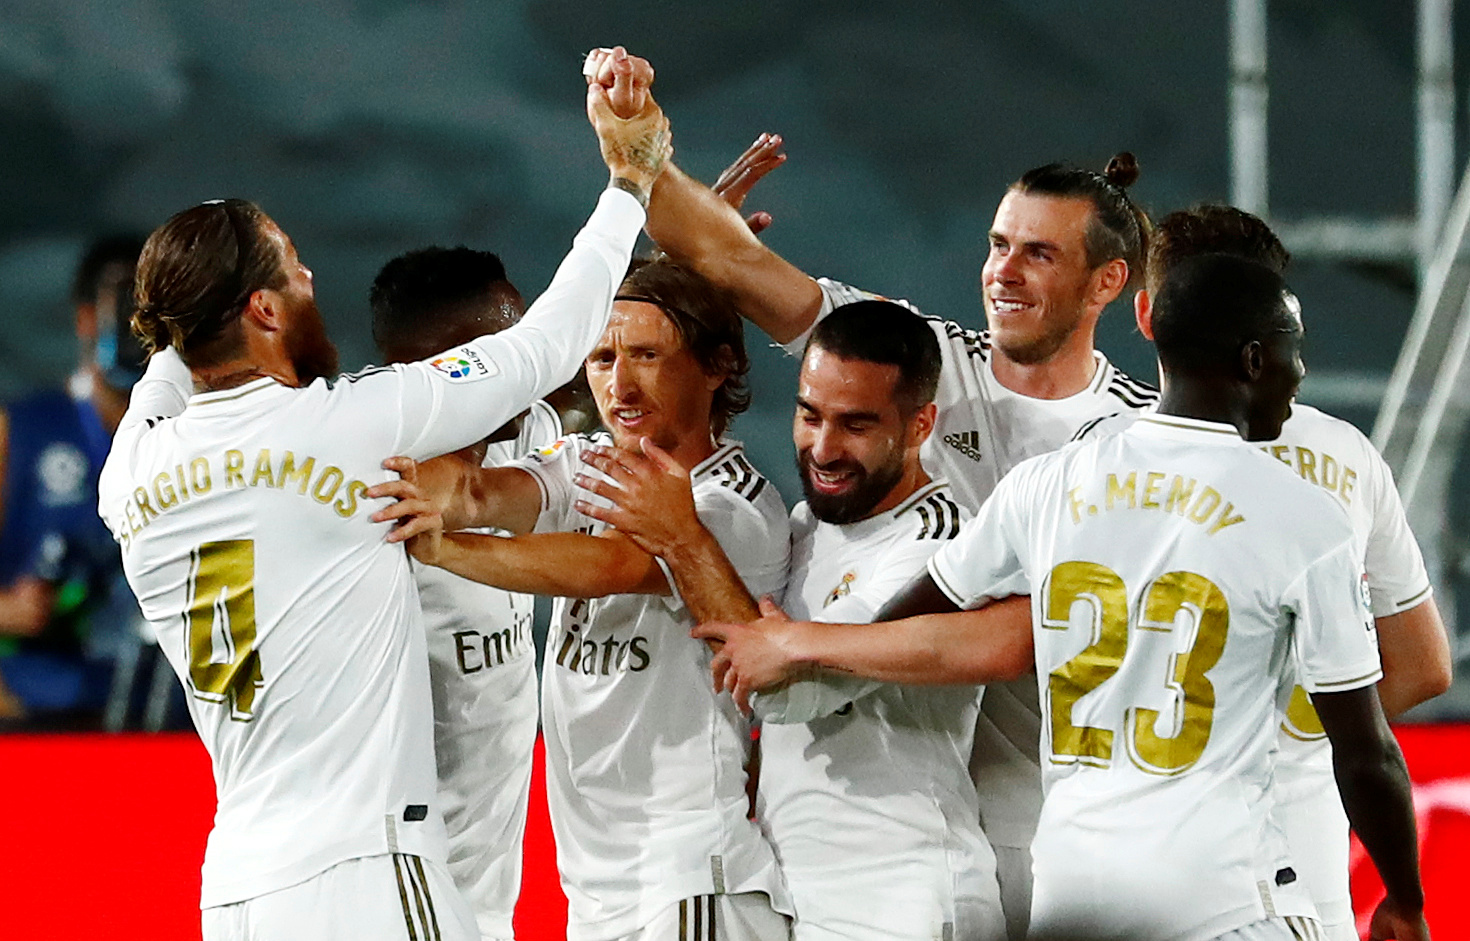 Real Madrid's Sergio Ramos celebrates scoring their second goal with teammates, as play resumes behind closed doors following the outbreak of the coronavirus disease (COVID-19) during the  La Liga Santandermatch between Real Madrid and Real Mallorca, at  Alfredo Di Stefano Stadium, in Madrid, Spain, on June 24, 2020. Photo: Reuters